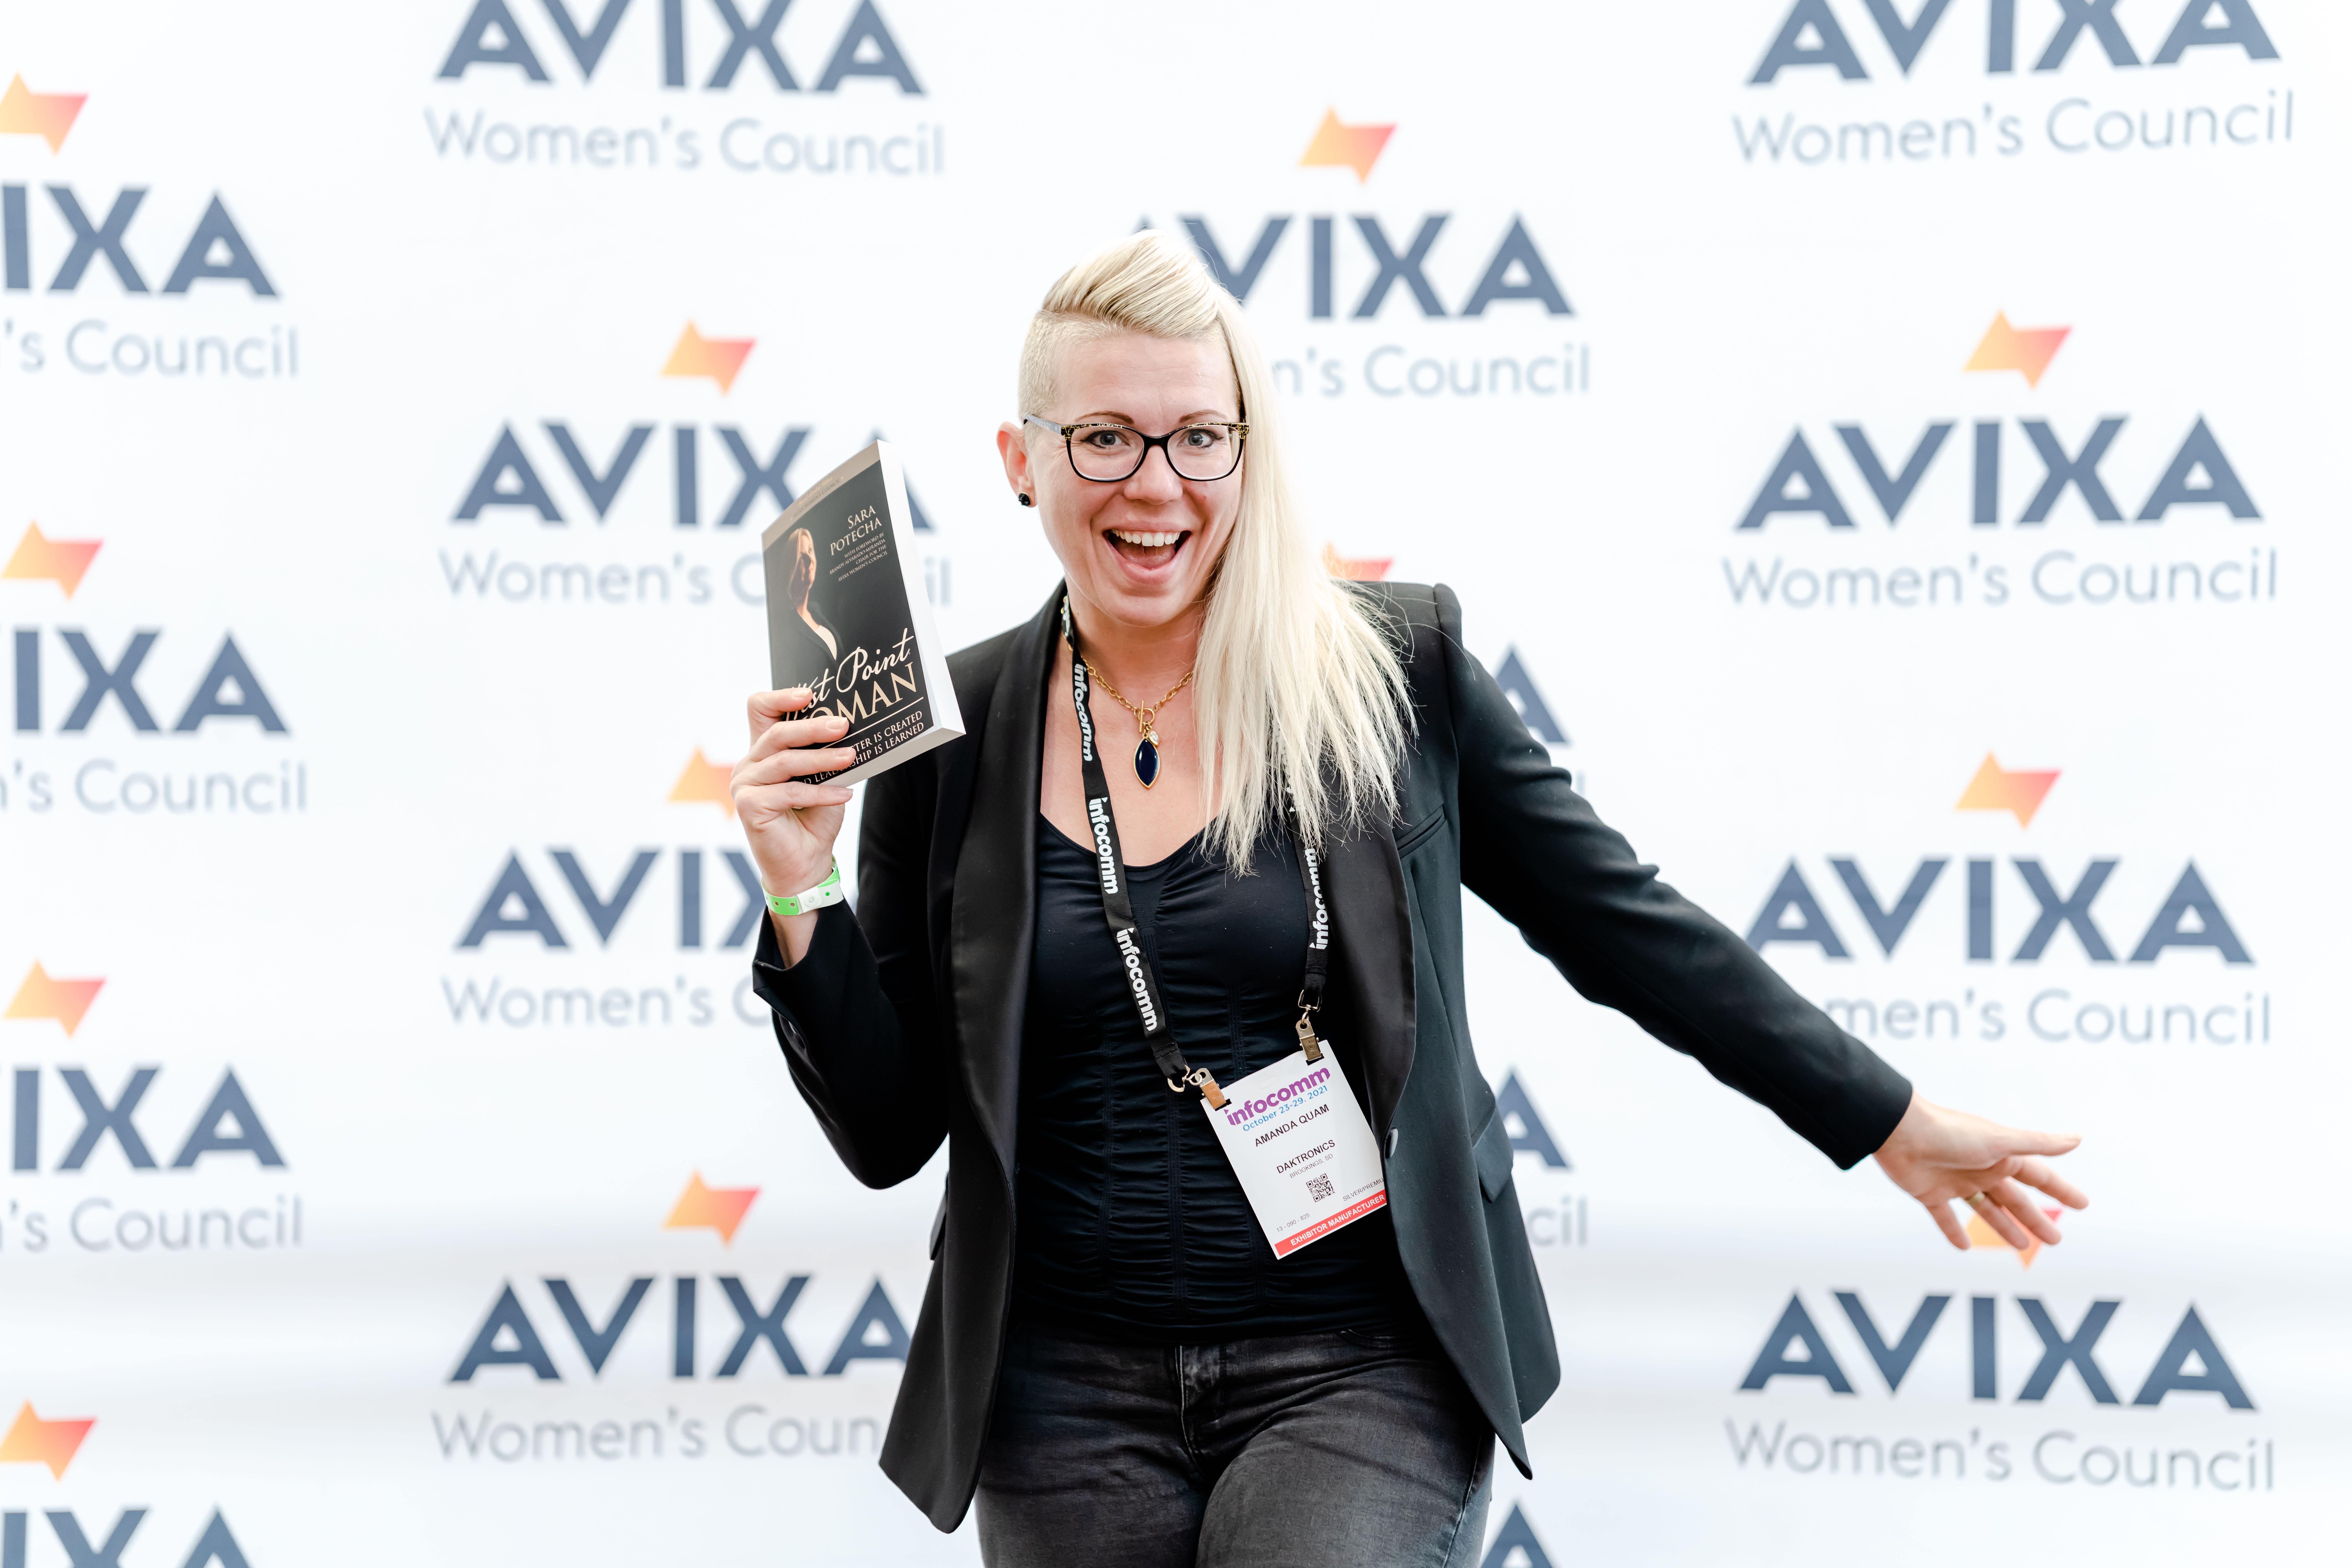 AVIXA Women’s Council Will Reunite at InfoComm 2022 after Celebratory Return to In-person Gatherings at ISE 2022